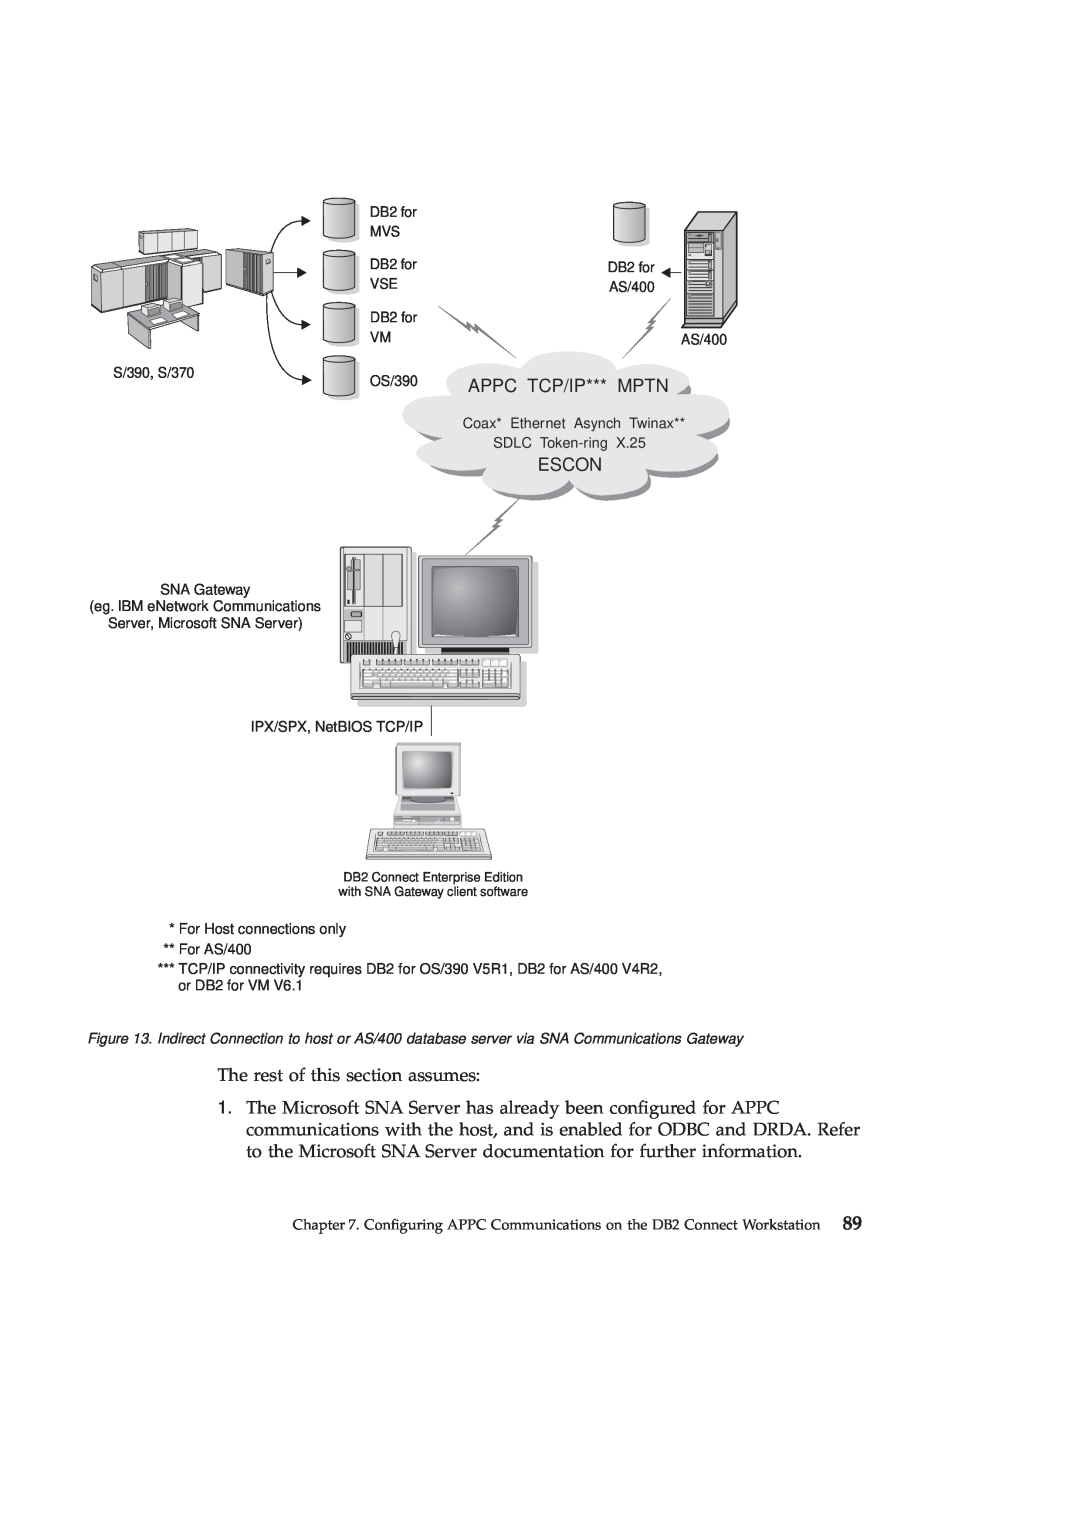 IBM GC09-2830-00 manual OS/390 APPC TCP/IP*** MPTN, Escon, The rest of this section assumes 